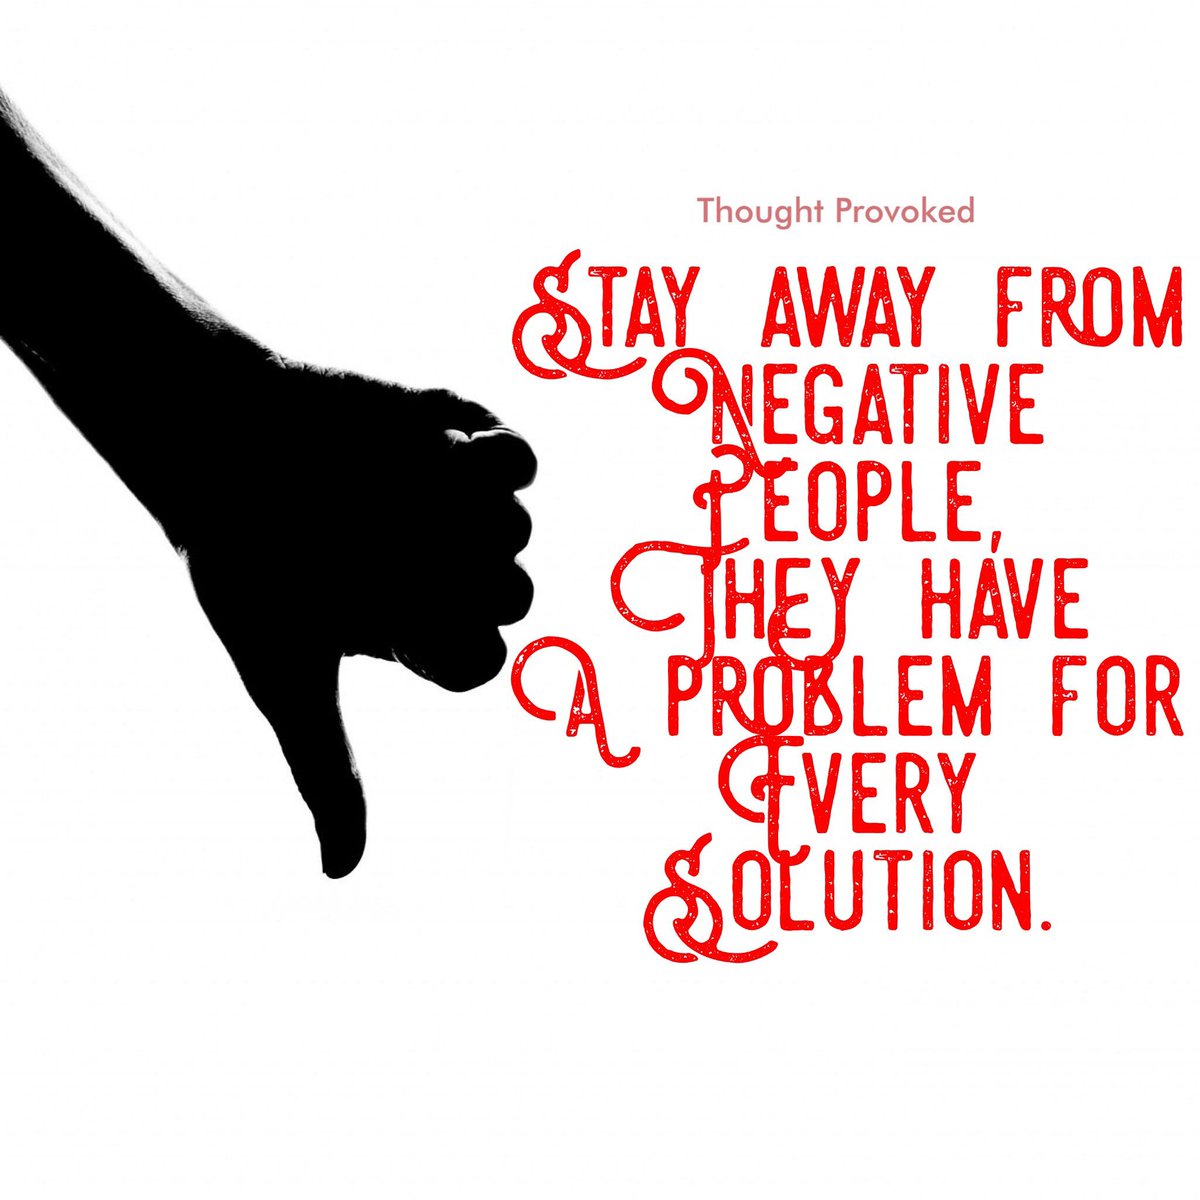 Stay away from negative people, they have a problem for every solution!
#quote
#IQRTG